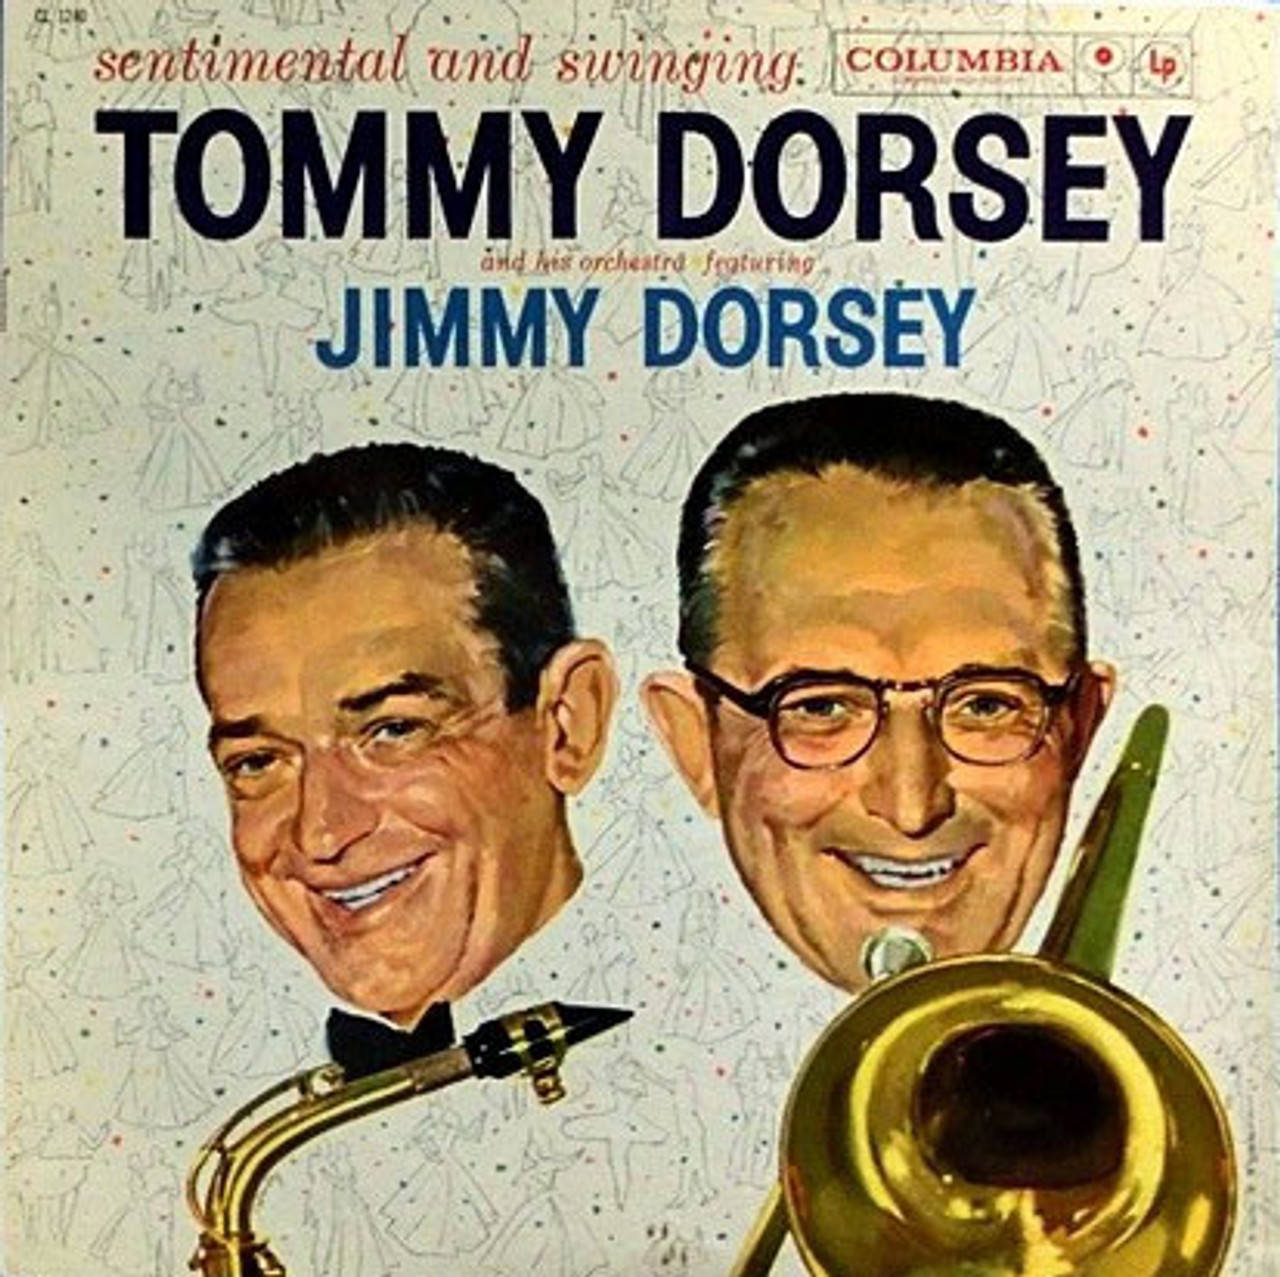 The iconic American Jazz musicians Tommy Dorsey and Jimmy Dorsey on an album art cover. Wallpaper